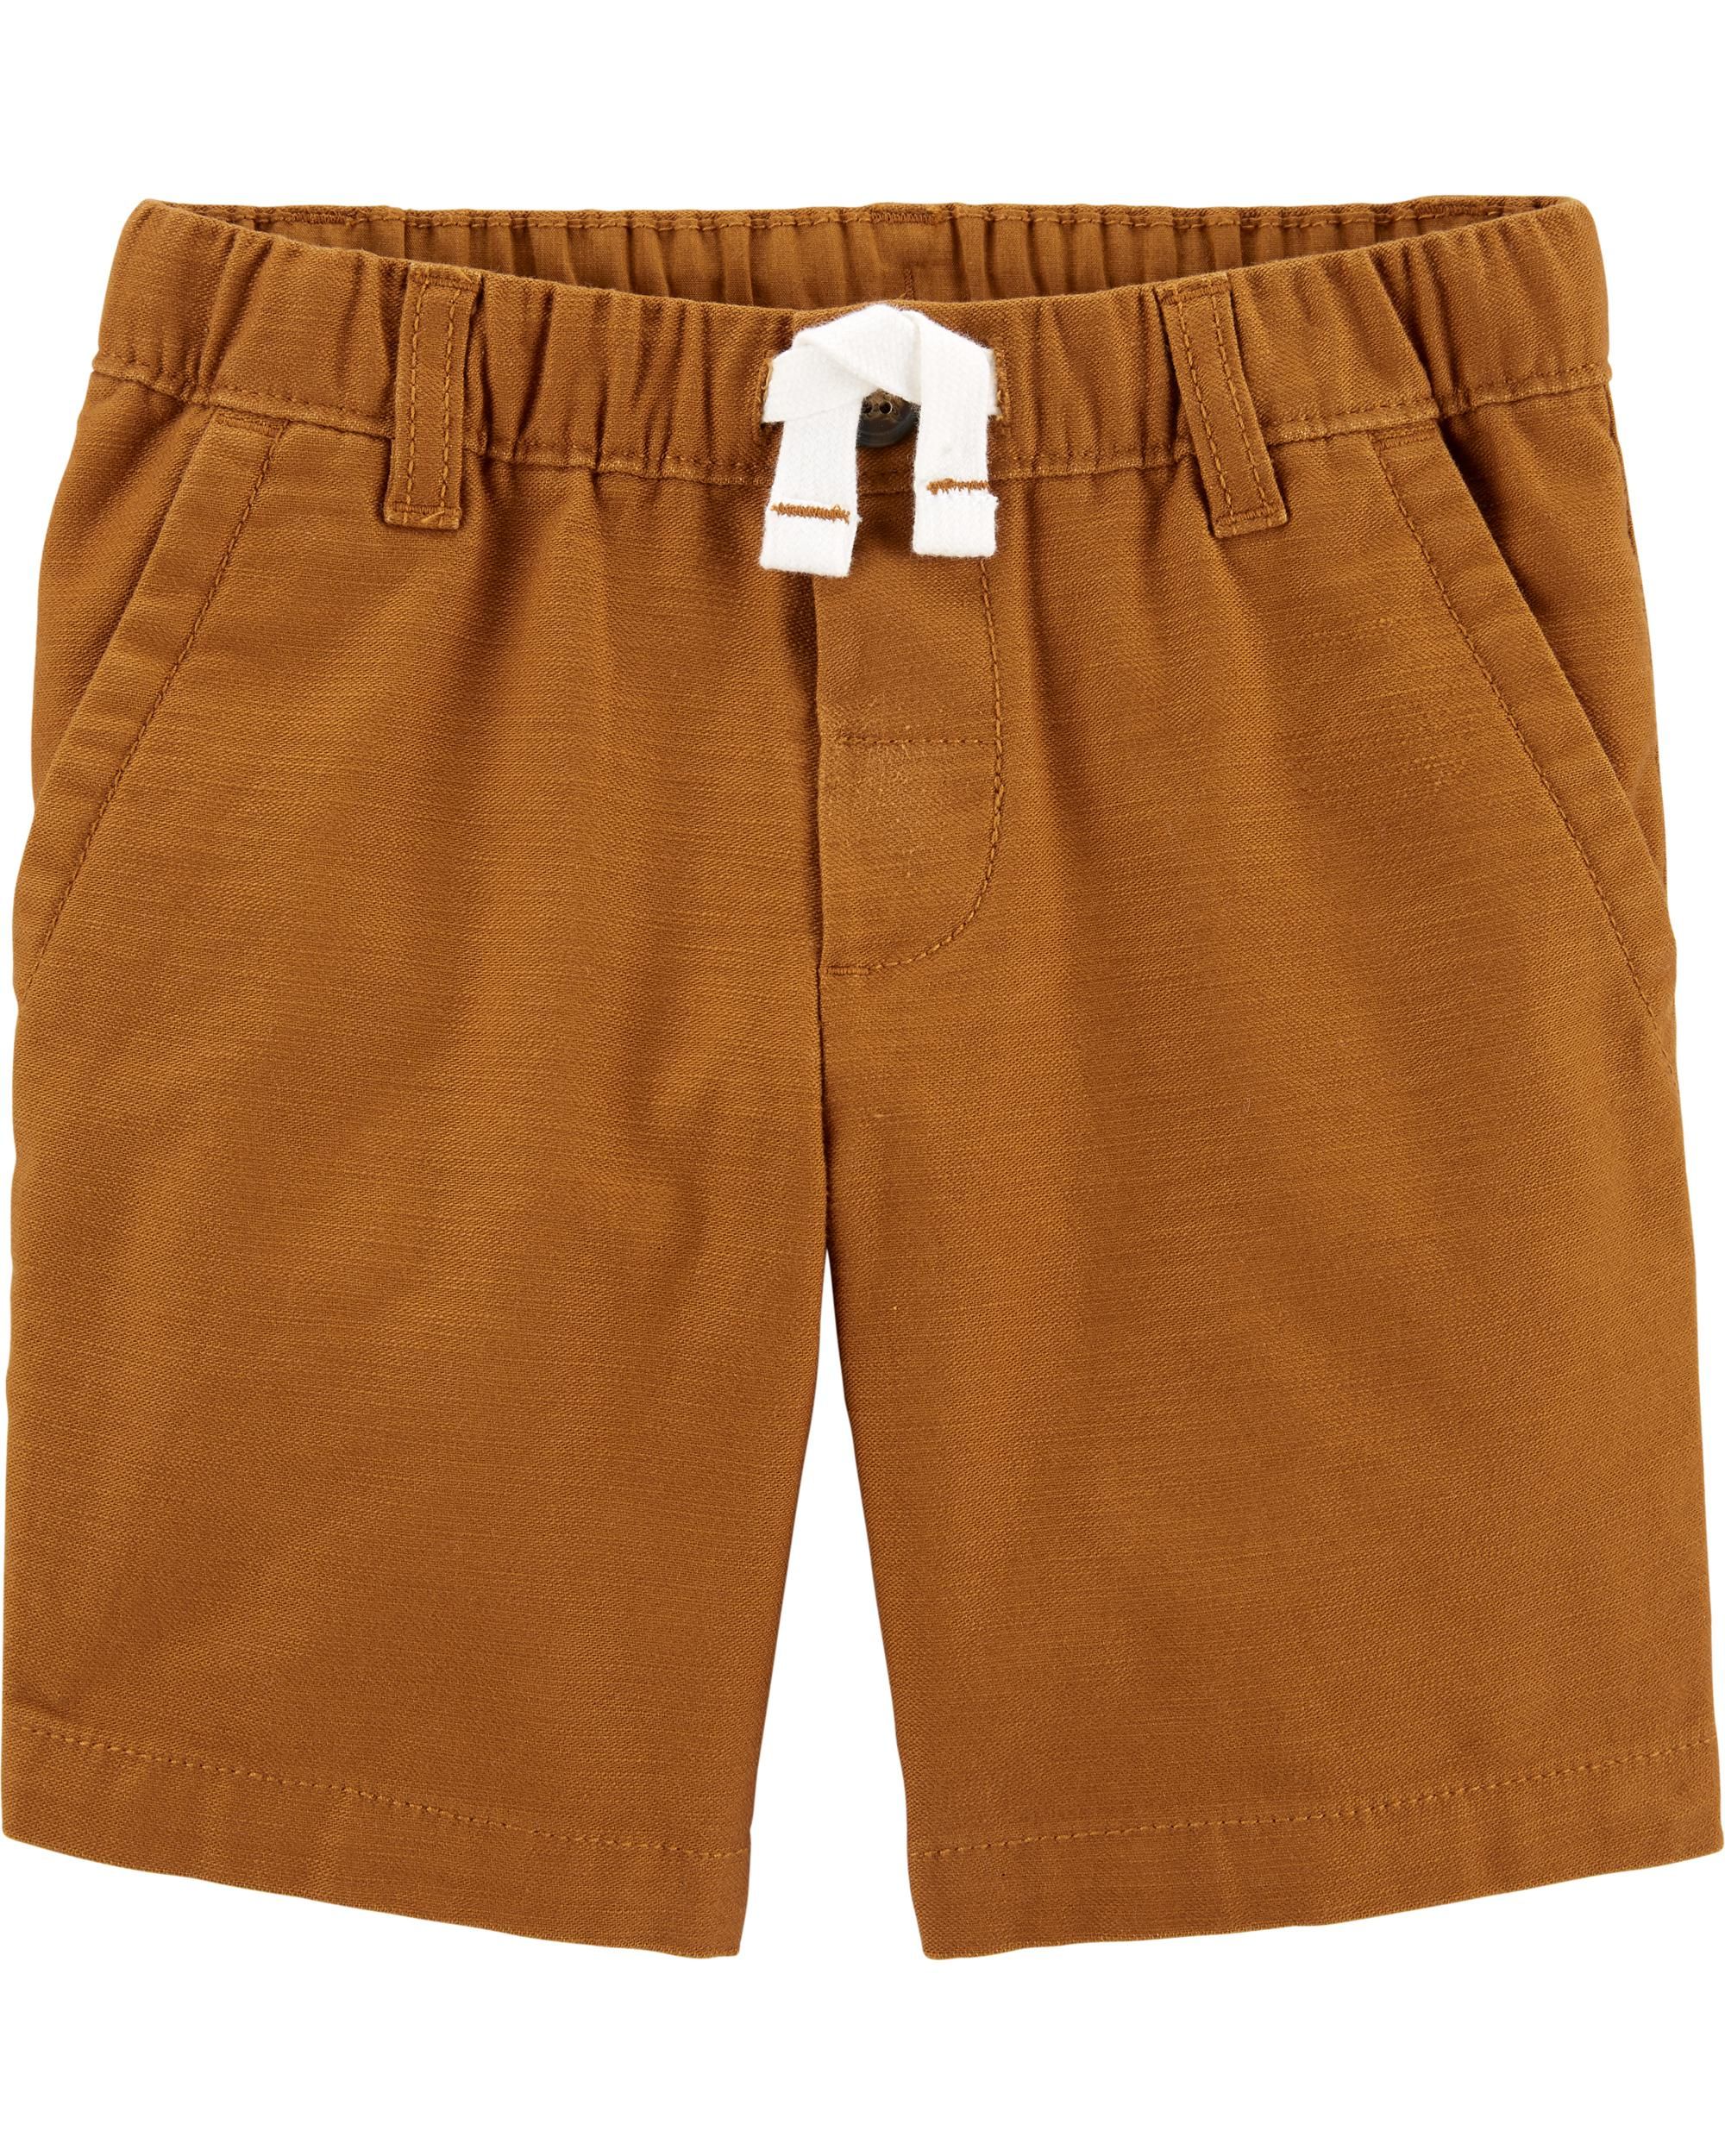 Everyday Pull-On Shorts | Carter's